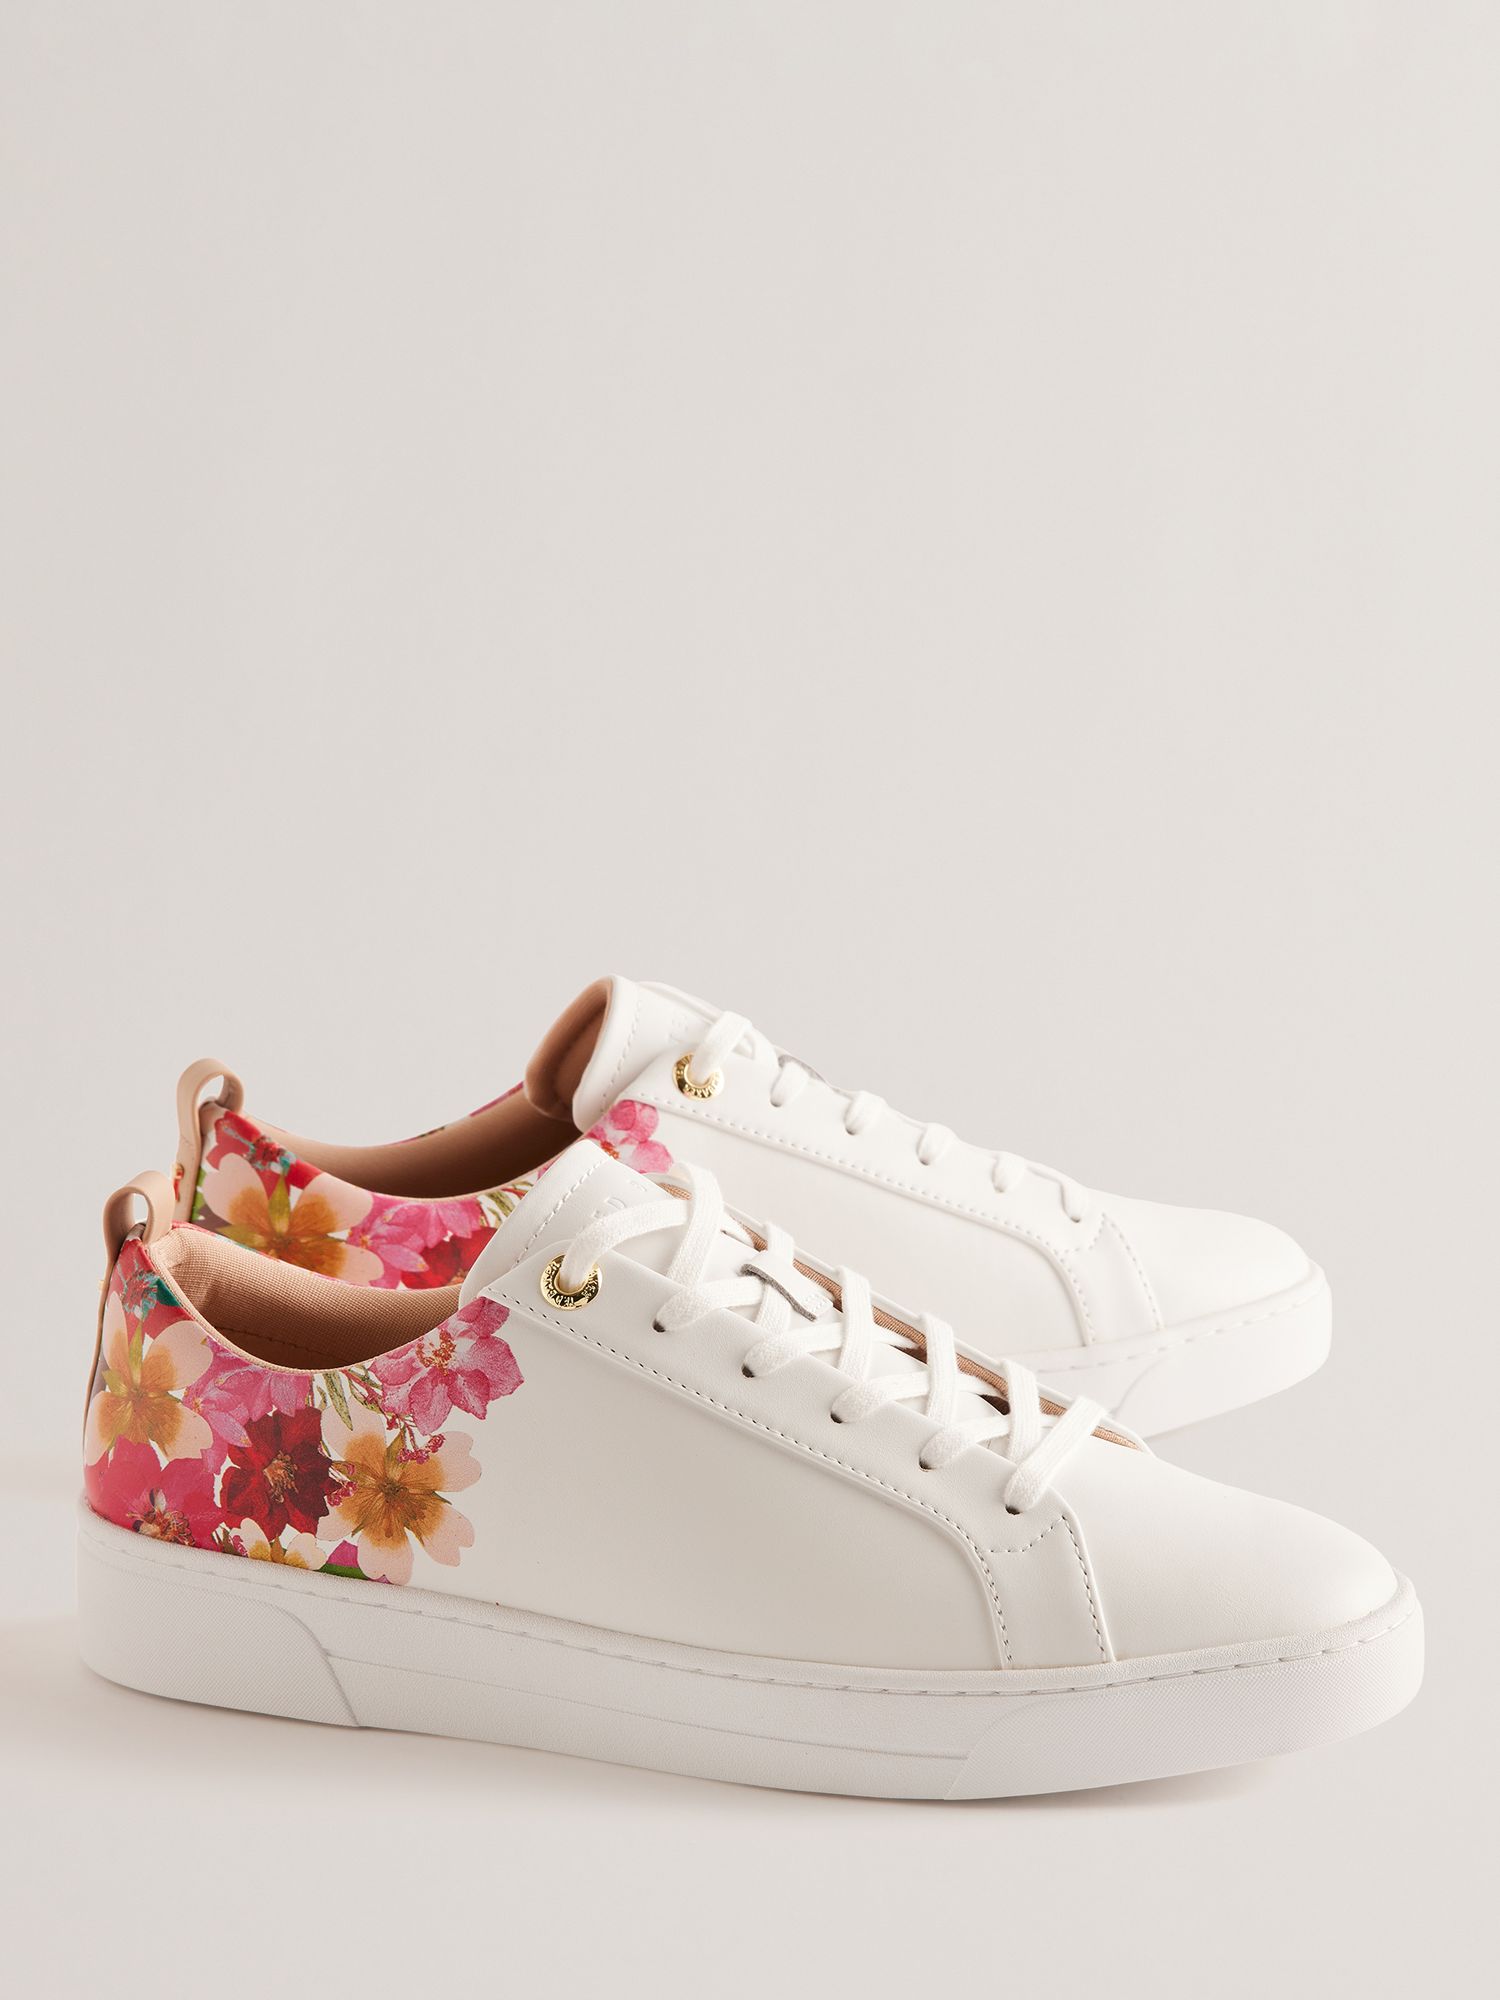 Ted Baker Alissn Floral Leather Cupsole Trainers, White/Multi, EU36